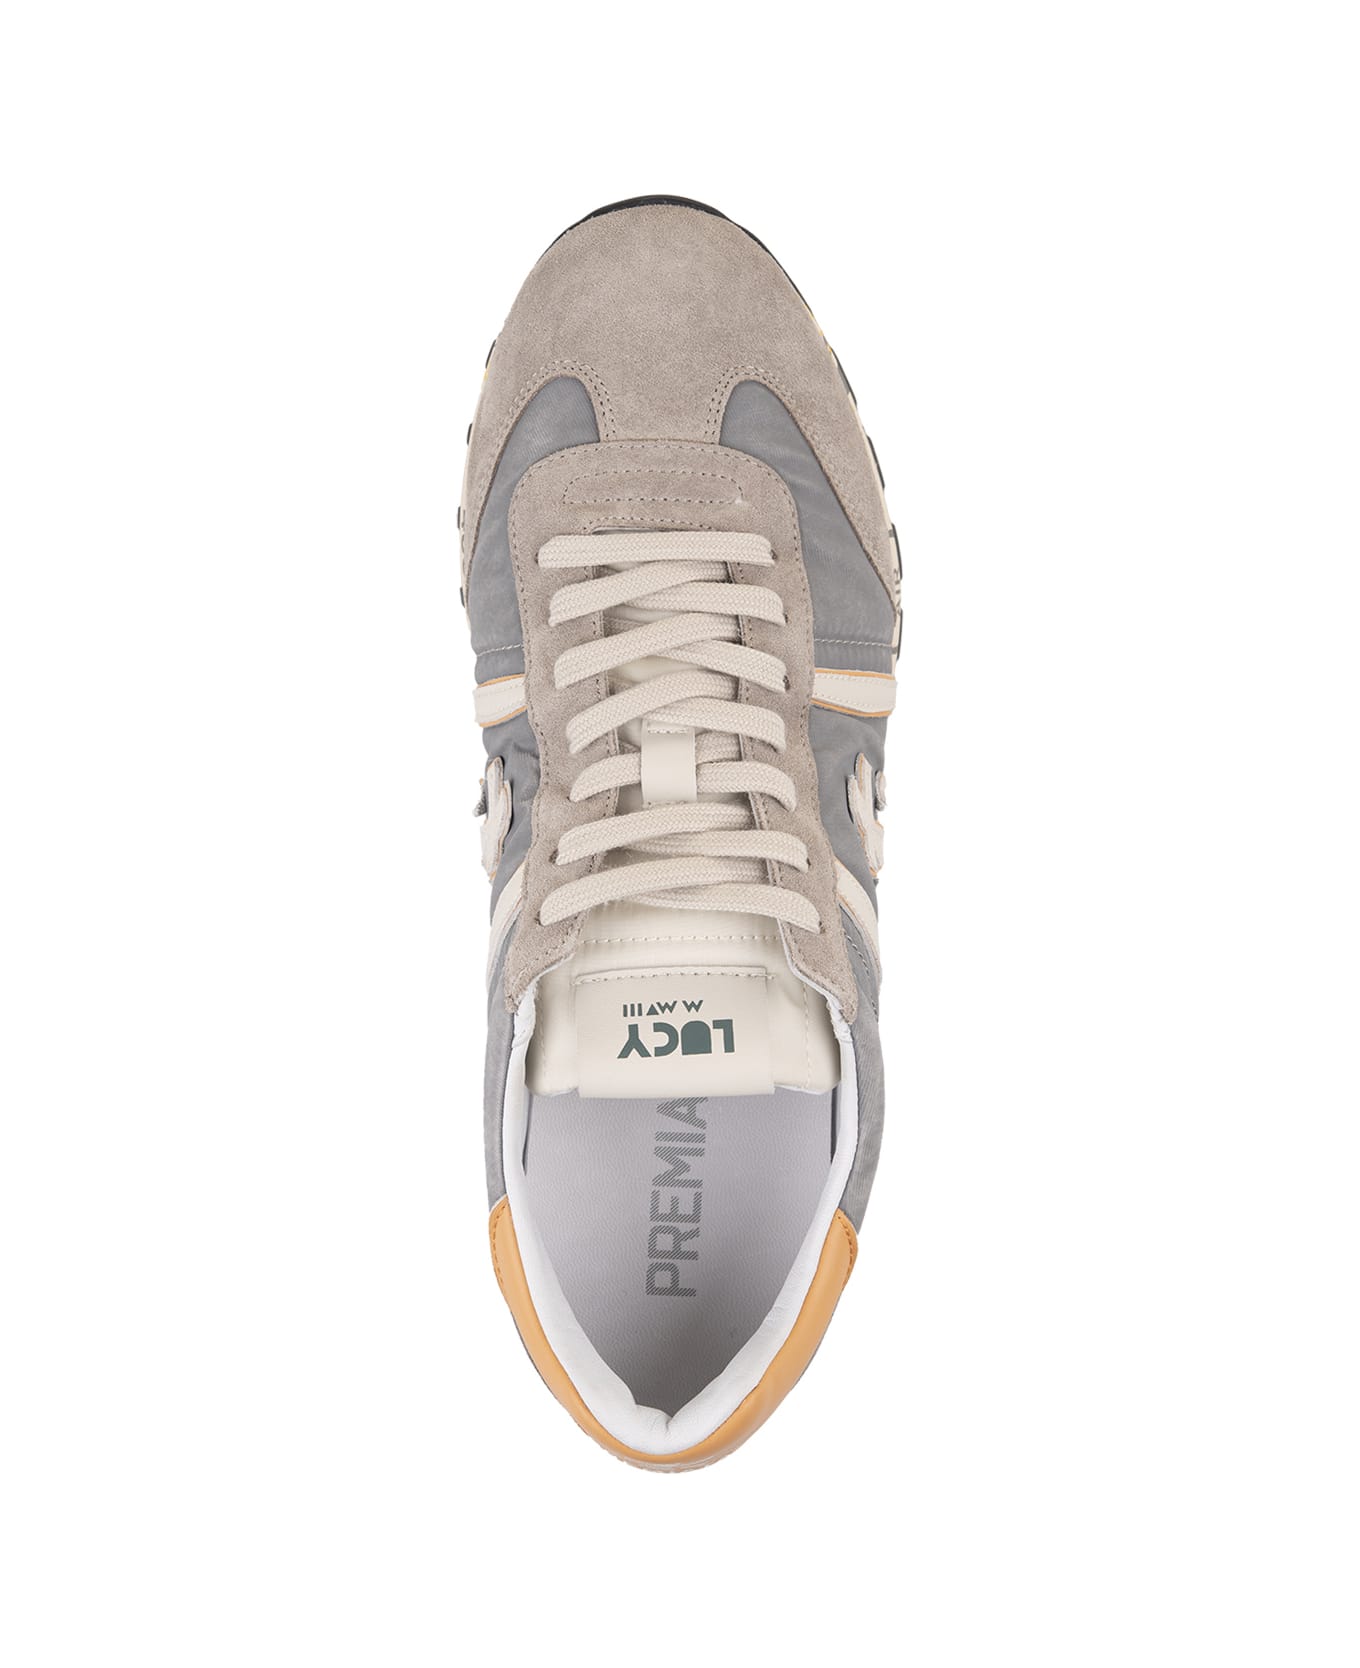 Premiata Lucy 6603 Sneakers - Grey スニーカー